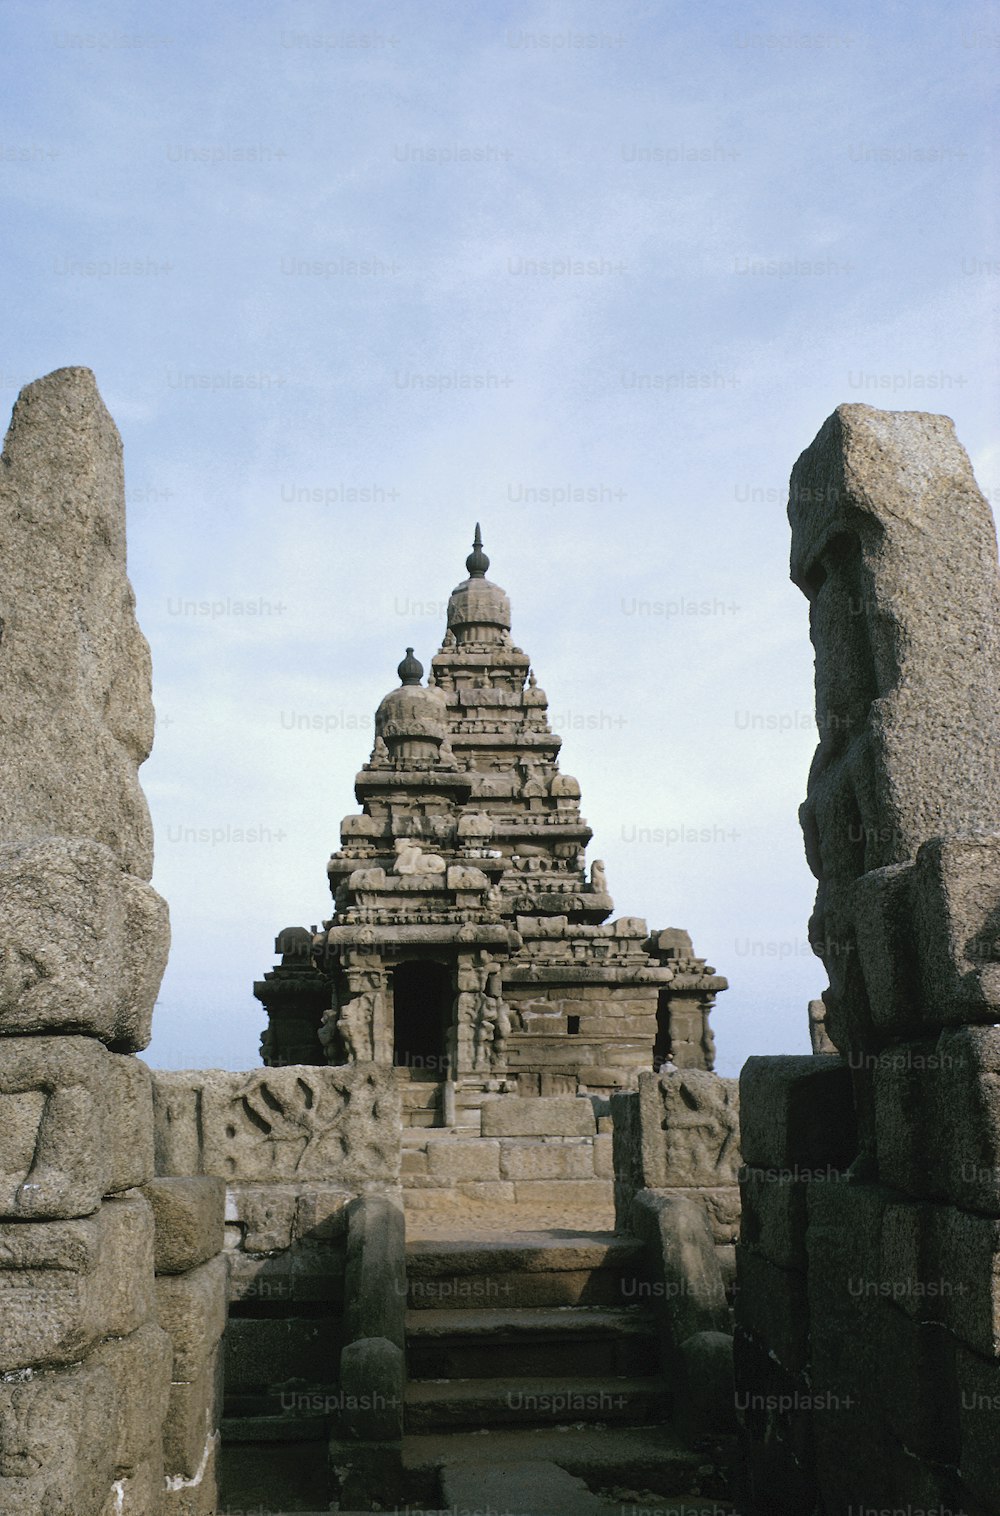 a large stone structure with a tower in the middle of it